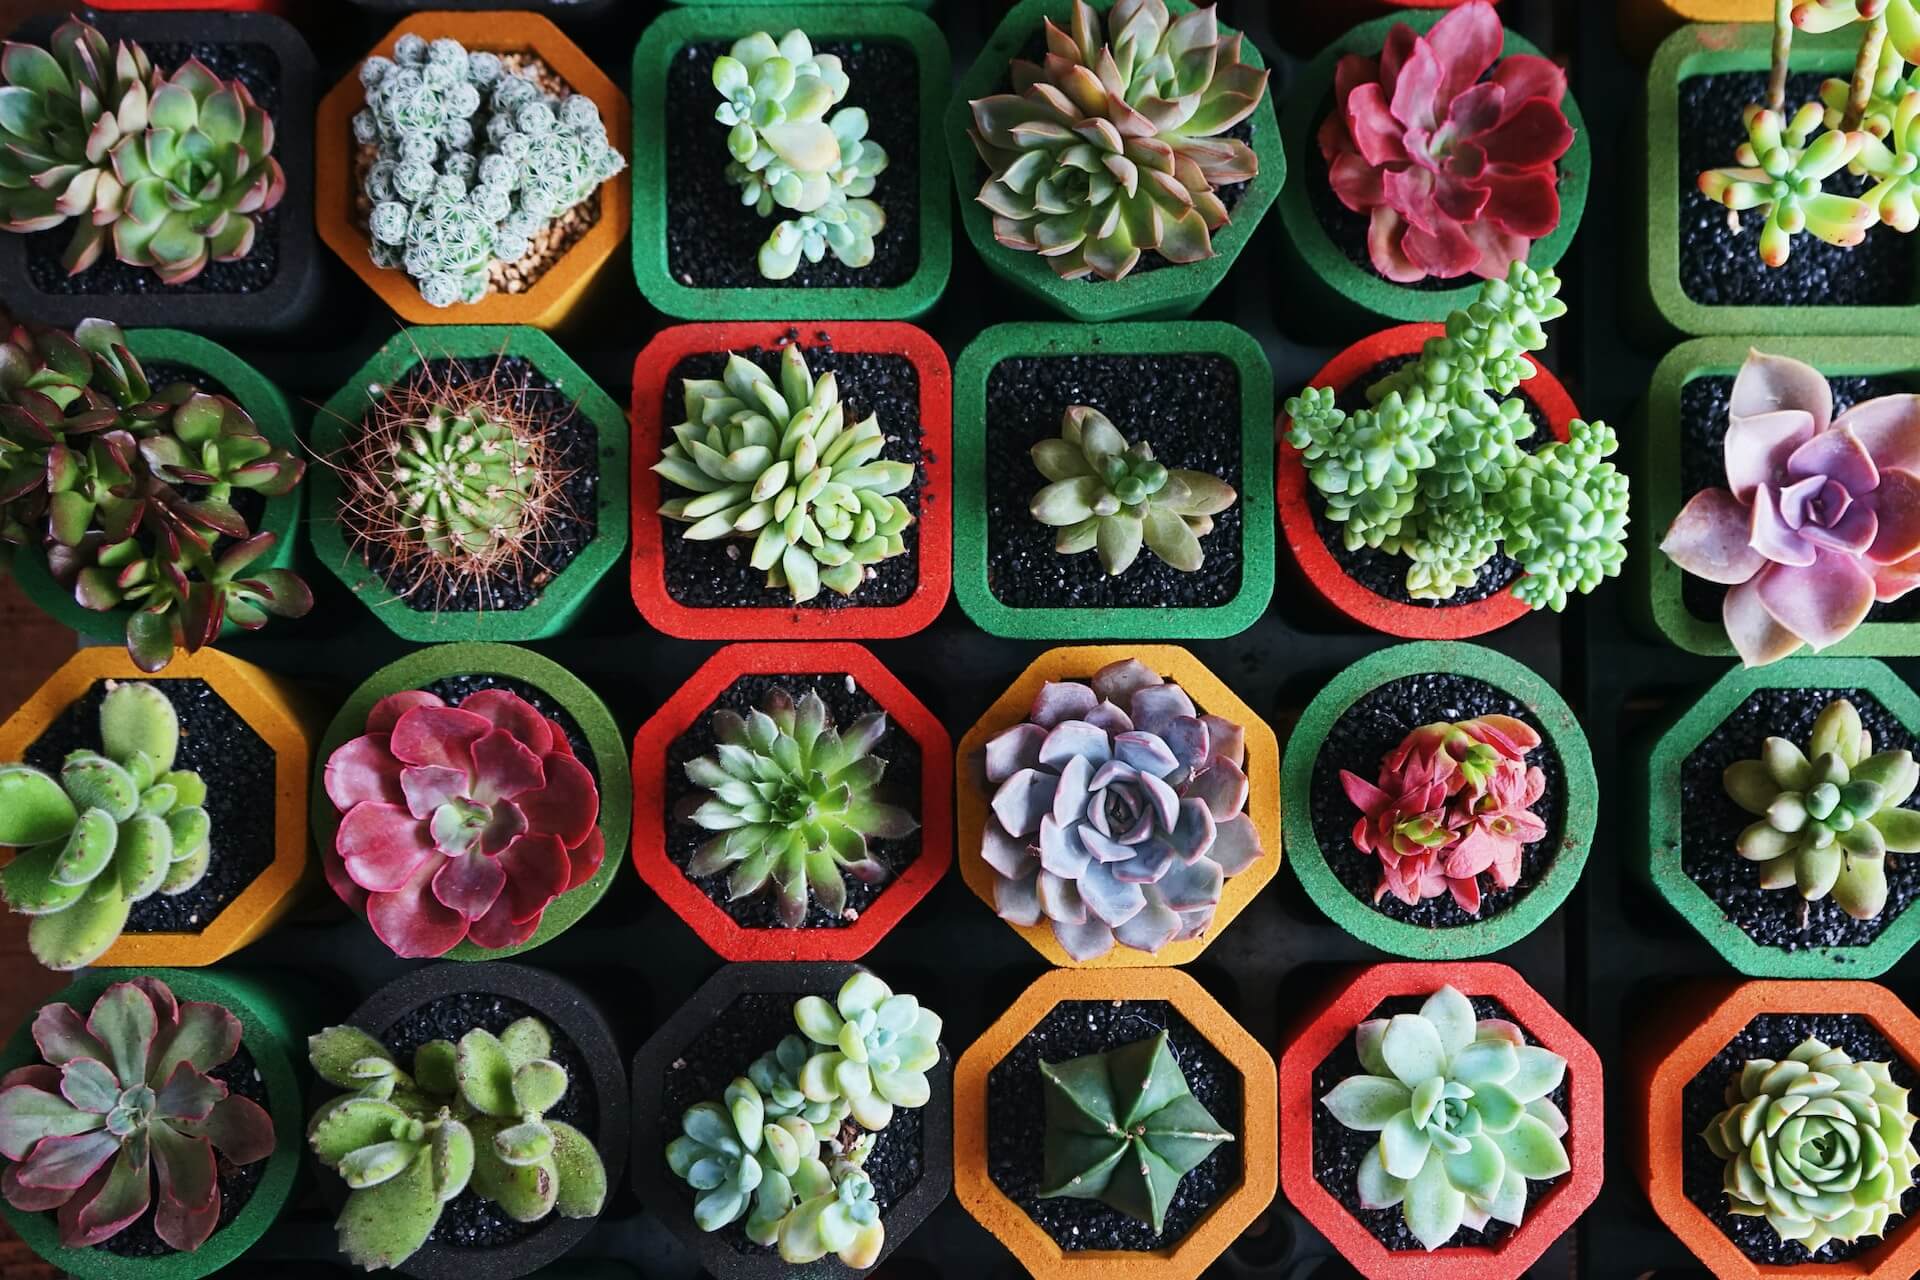 Succulent Care: how to take care of succulents